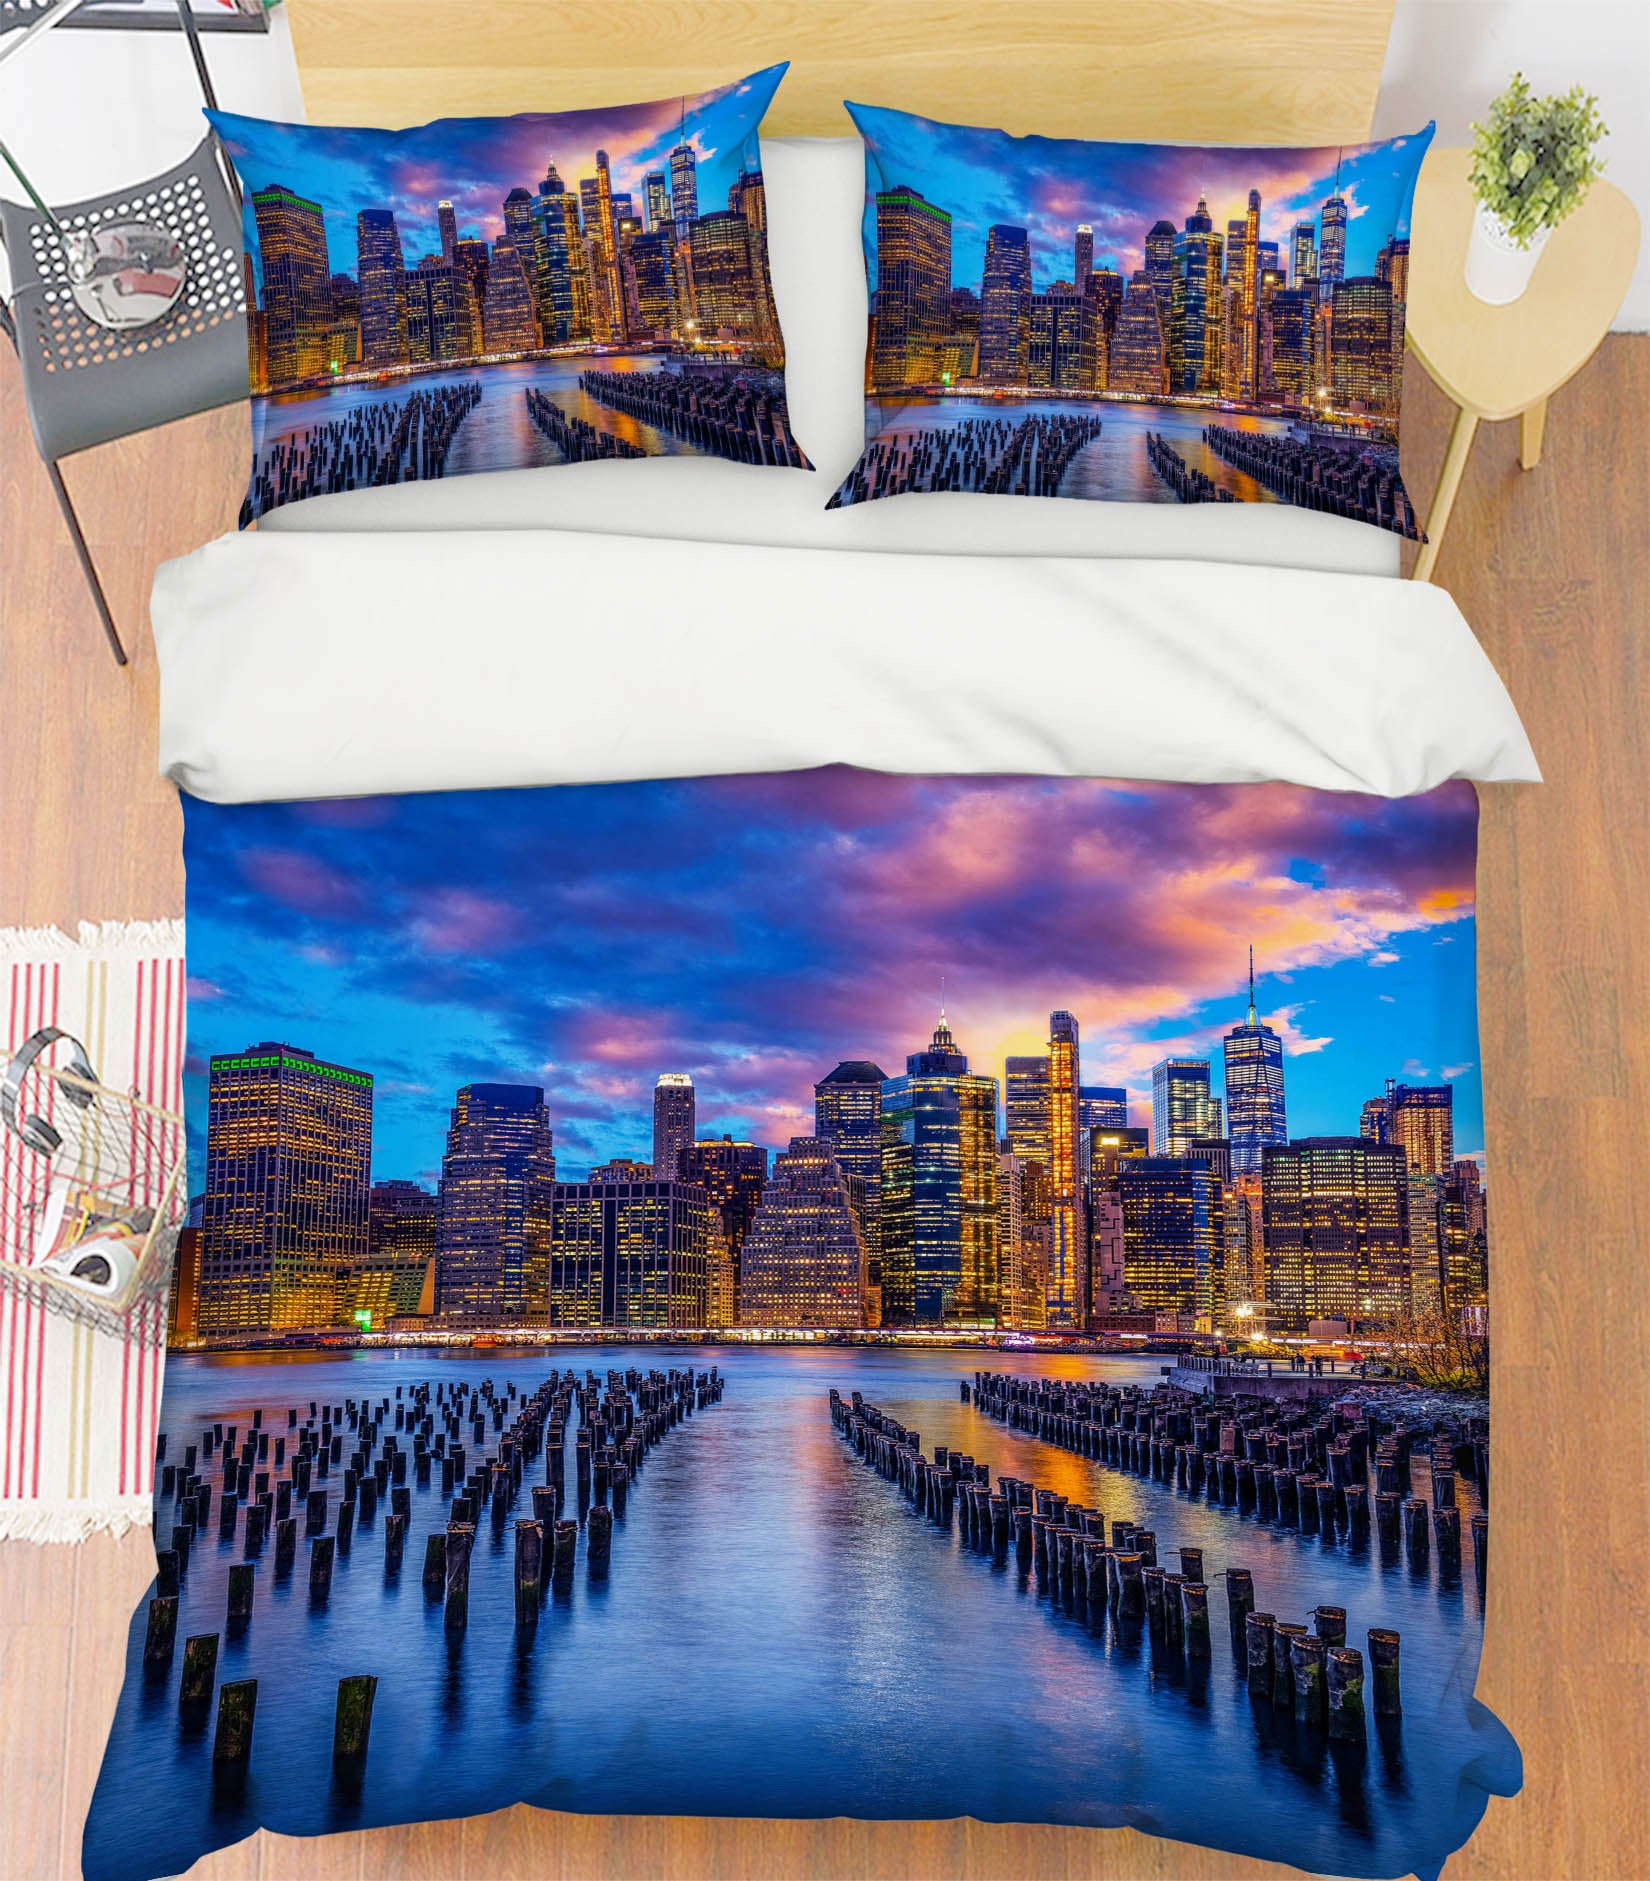 3D Night City River 127 Marco Carmassi Bedding Bed Pillowcases Quilt